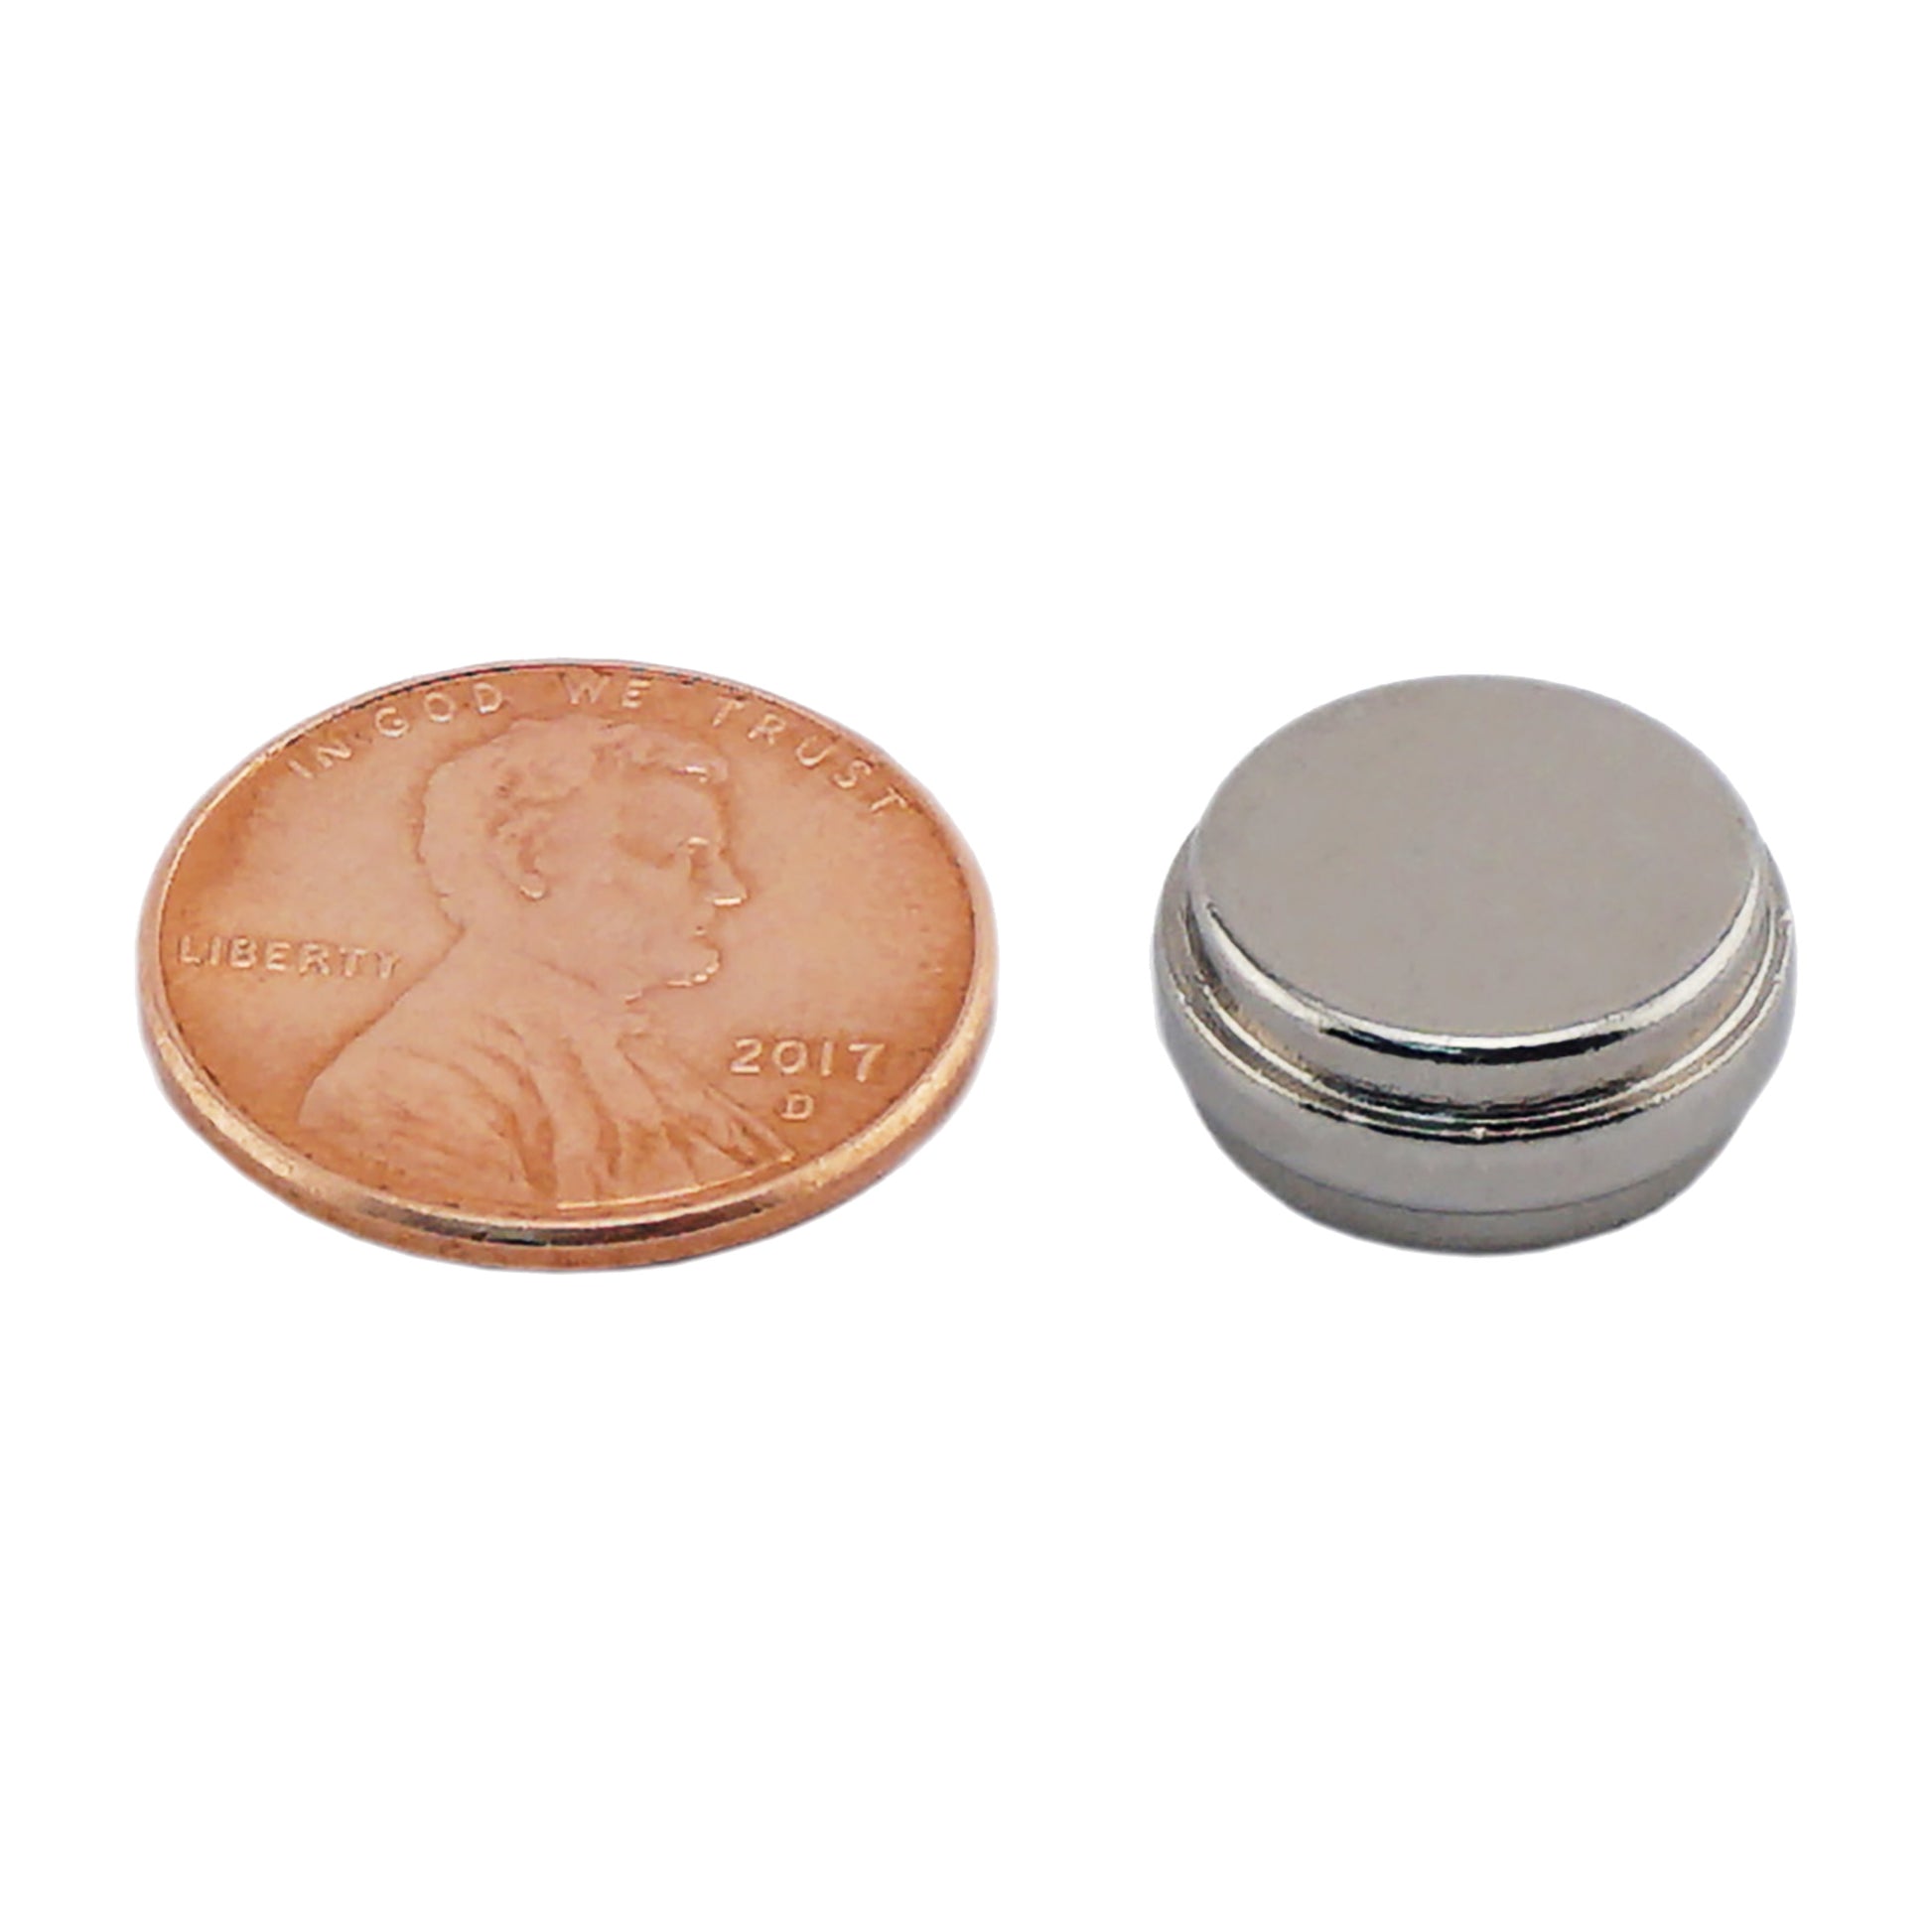 Load image into Gallery viewer, NDGO002500N Neodymium Disc Magnet - Compared to Penny for Size Reference